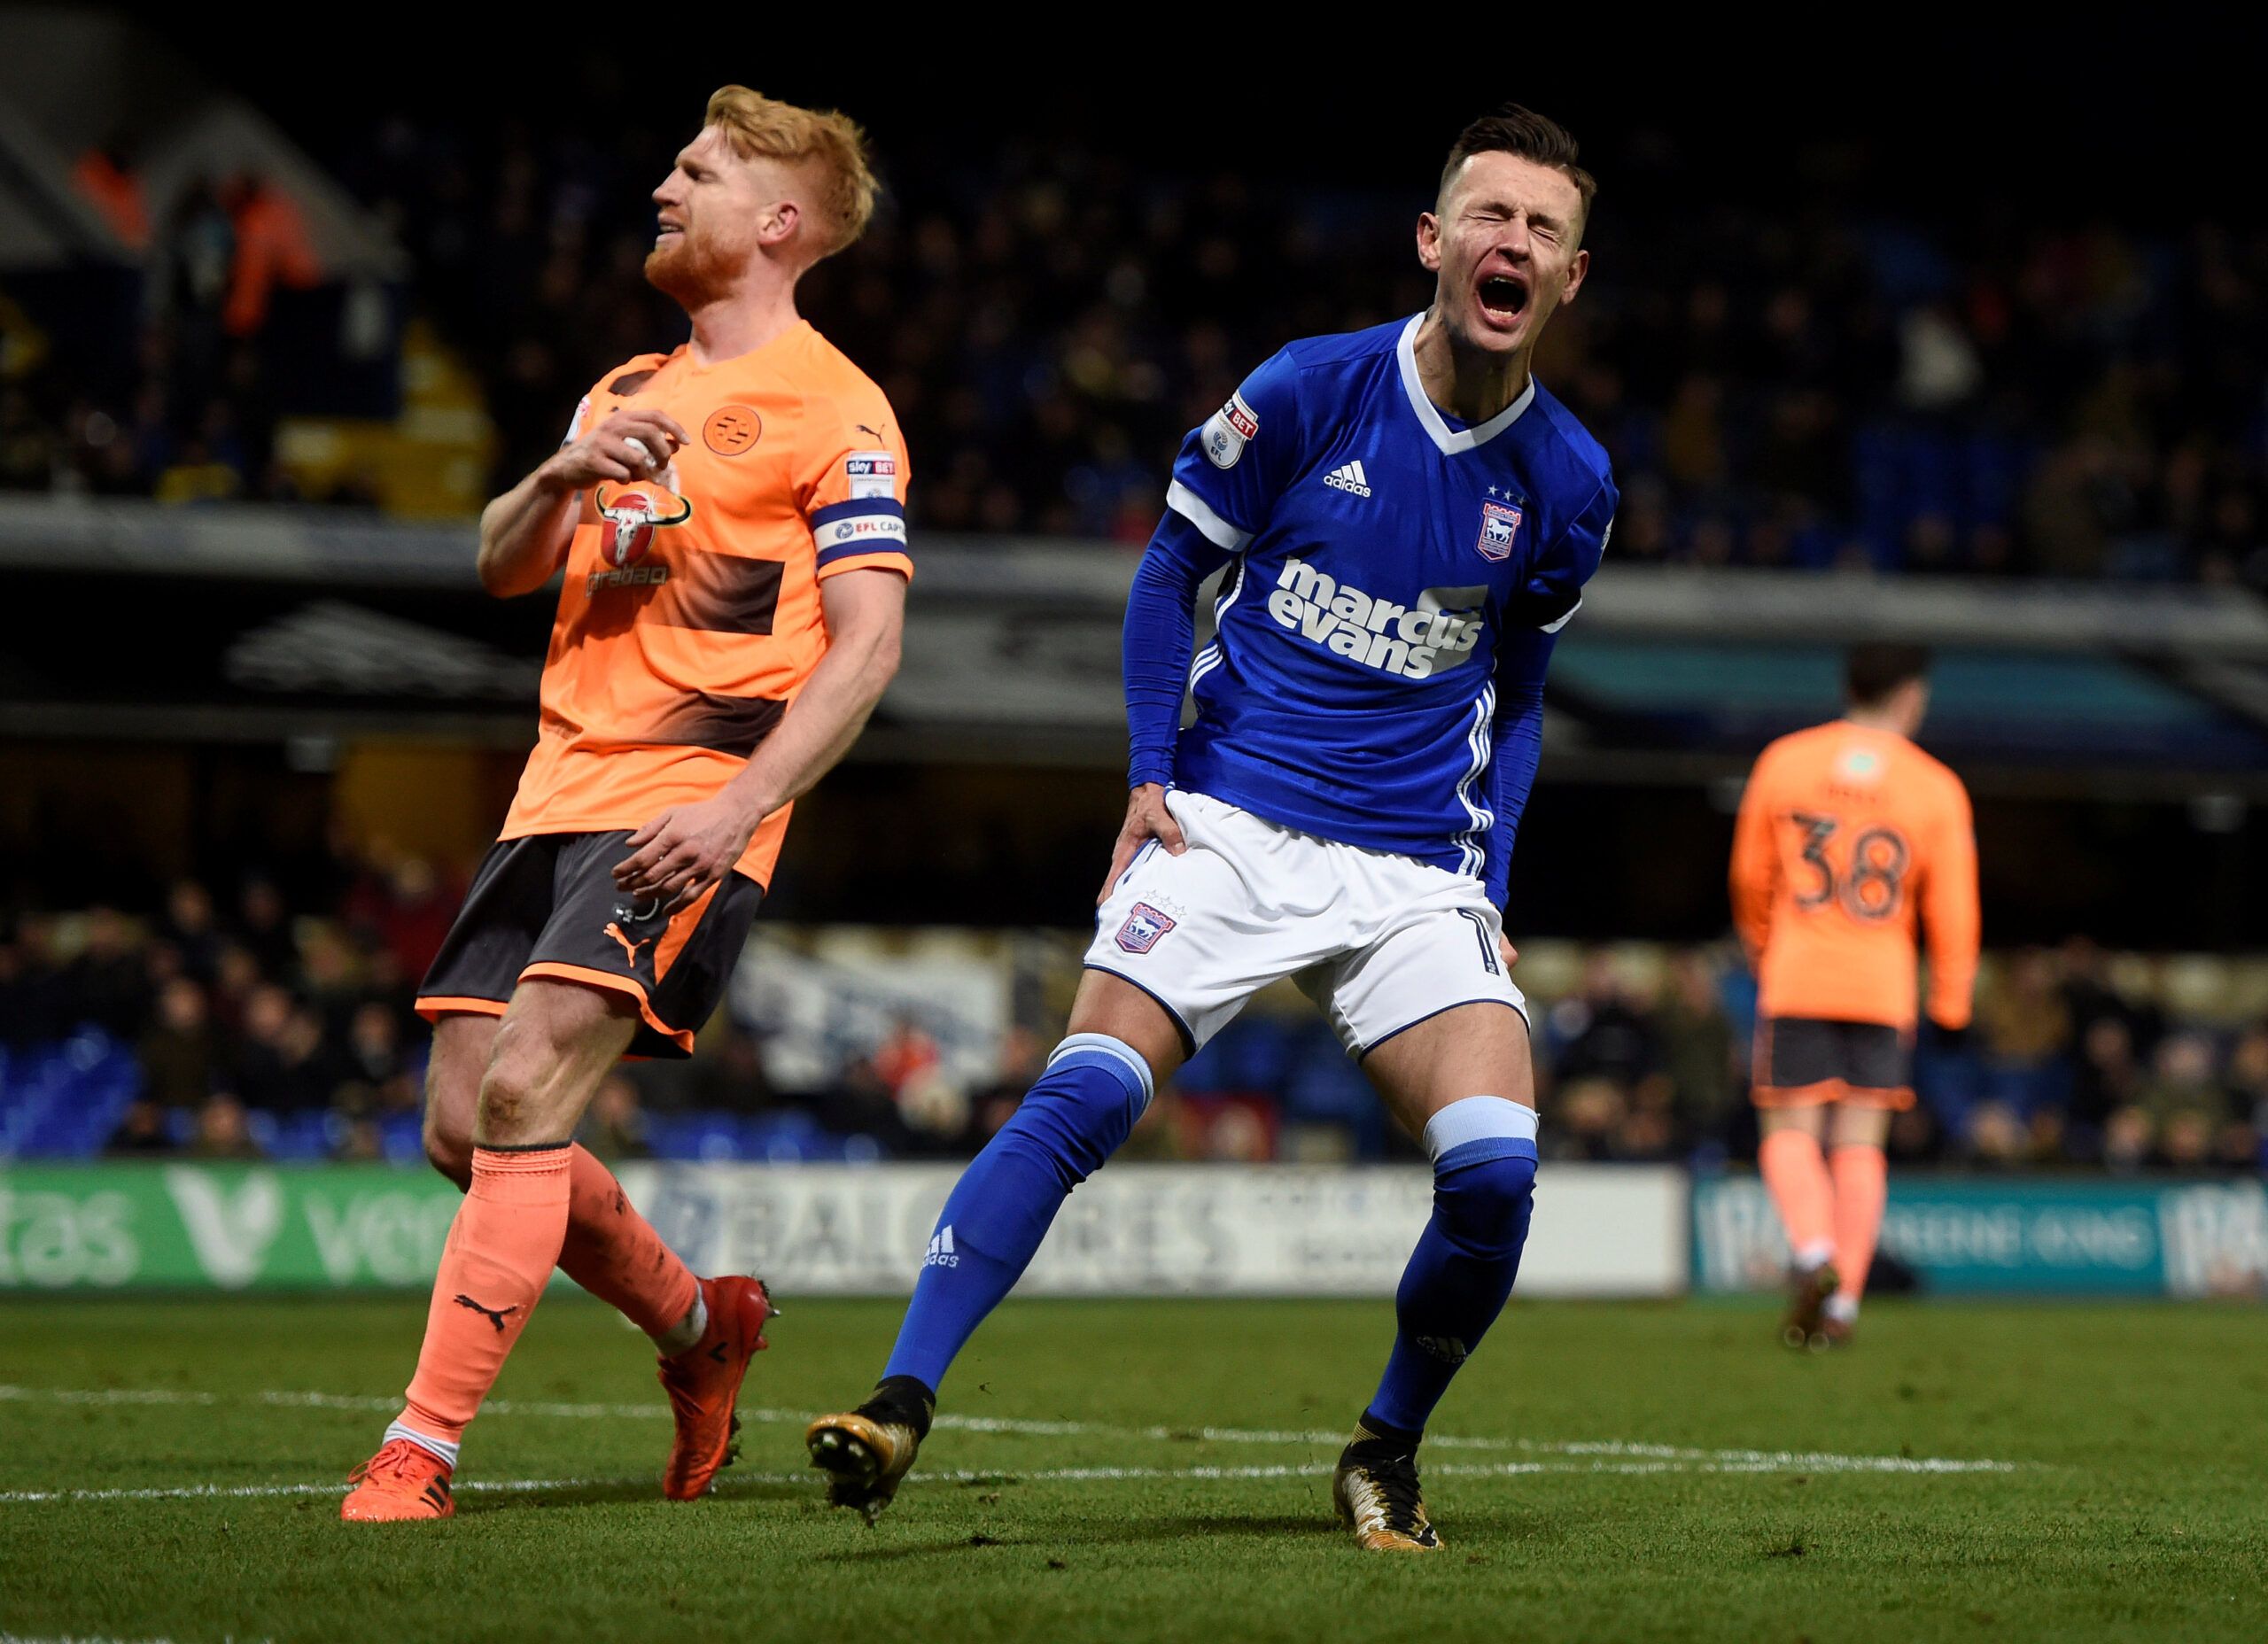 Soccer Football - Championship - Ipswich Town vs Reading - Portman Road, Ipswich, Britain - December 16, 2017  Ipswich's Bersant Celina reacts  Action Images/Alan Walter  EDITORIAL USE ONLY. No use with unauthorized audio, video, data, fixture lists, club/league logos or 